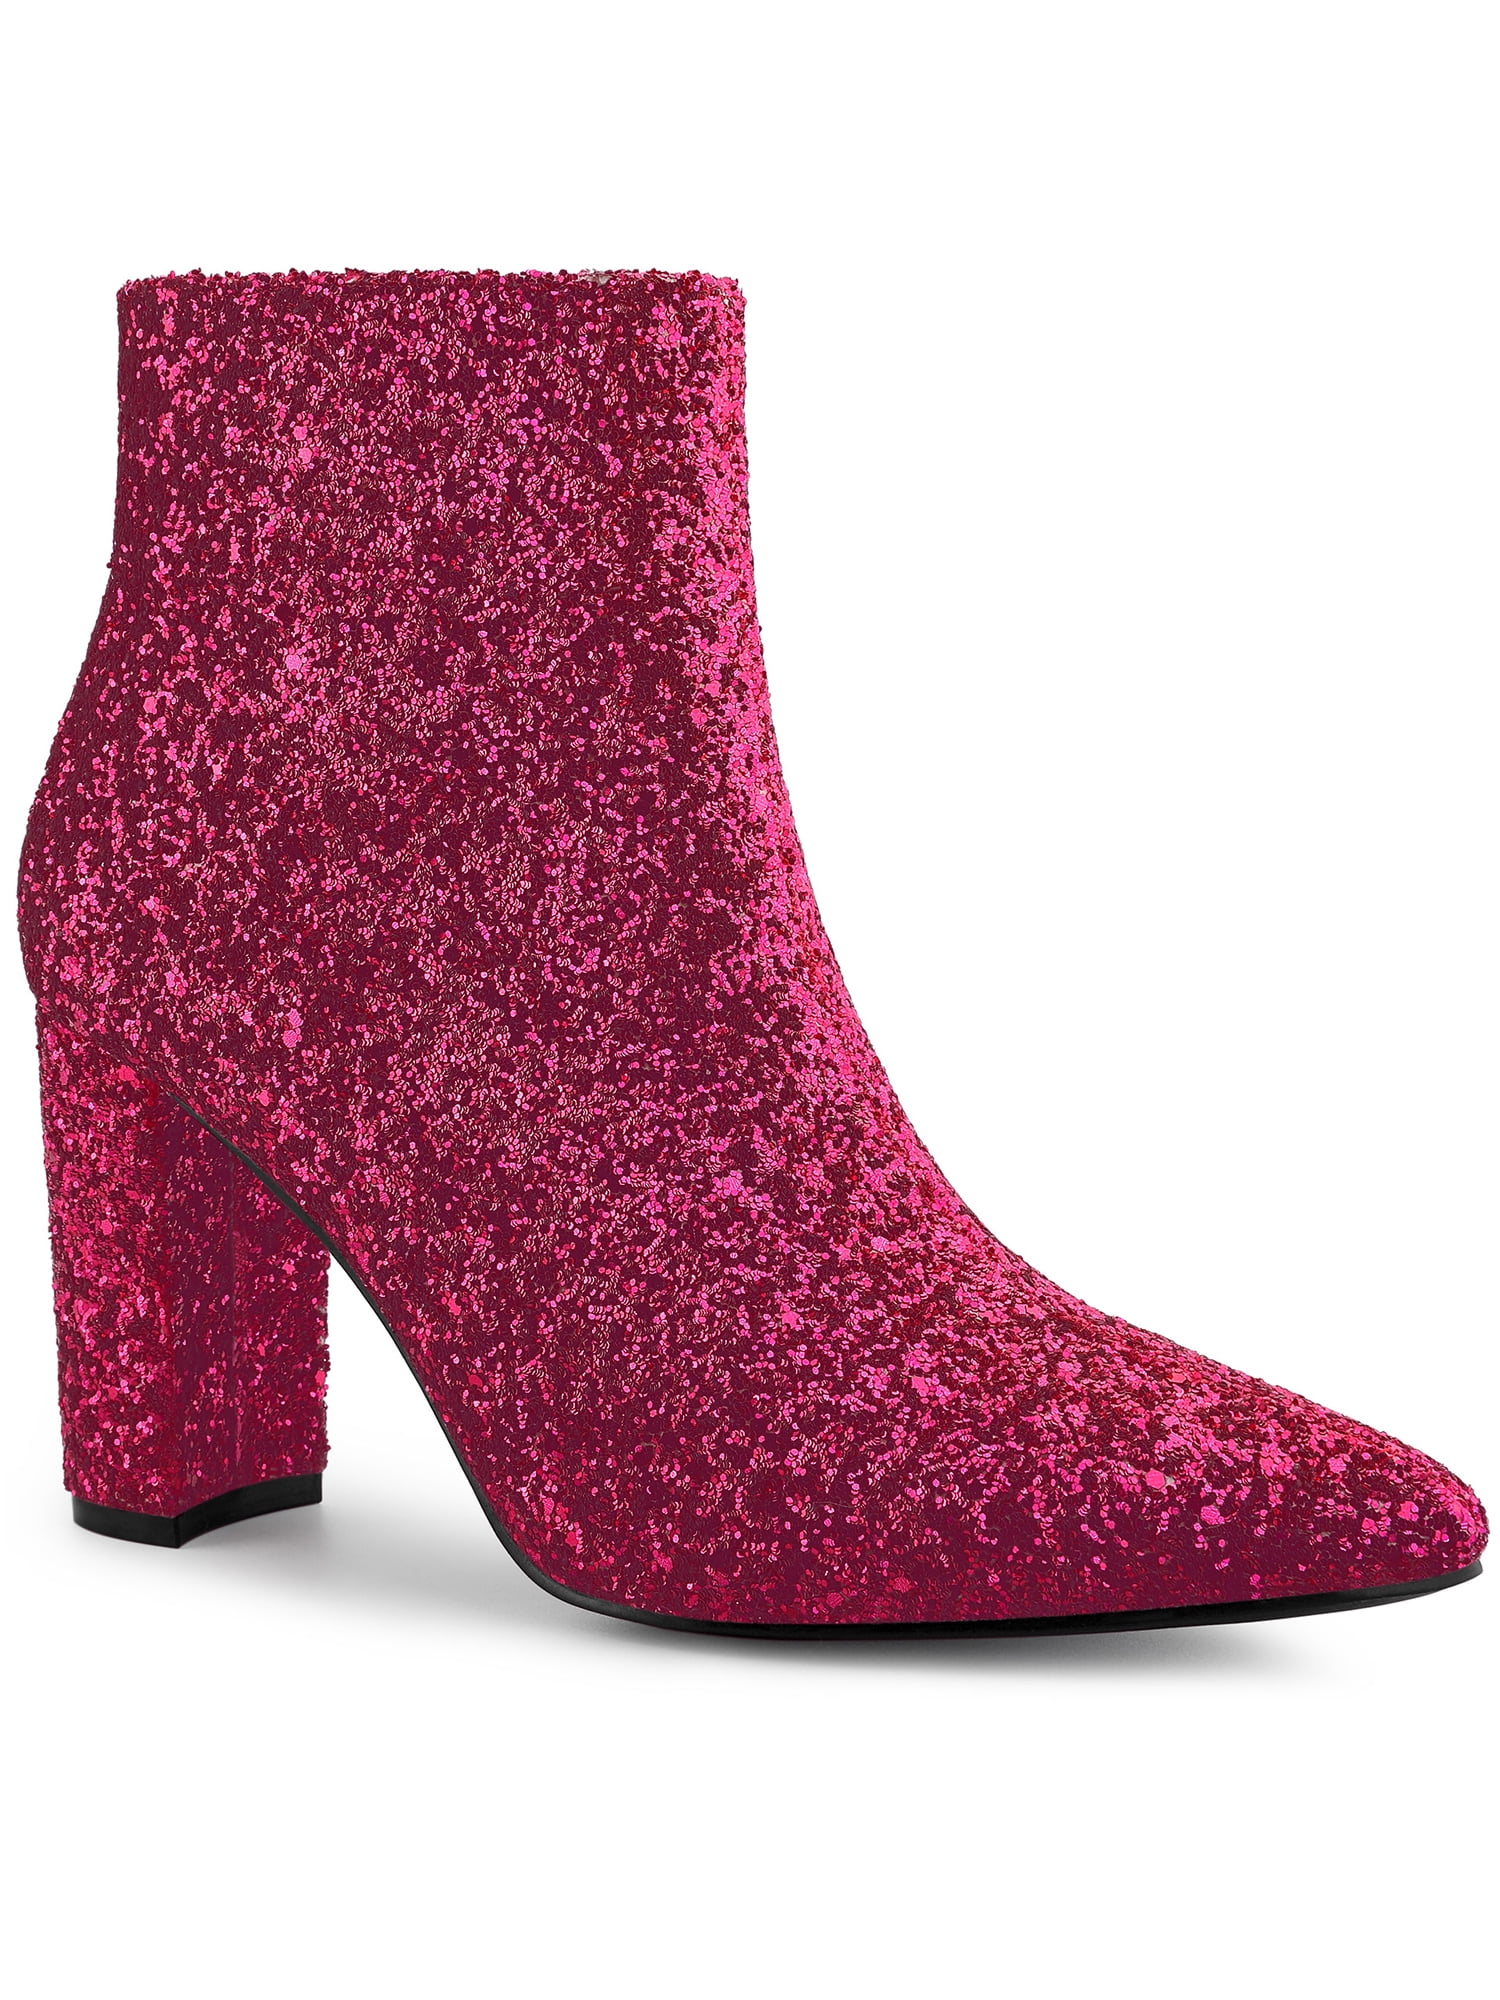 100mm Women's Pointed Toe Red Bottom Glitter Lipbooty High-Heel Booties  Ankle Heeled Boots